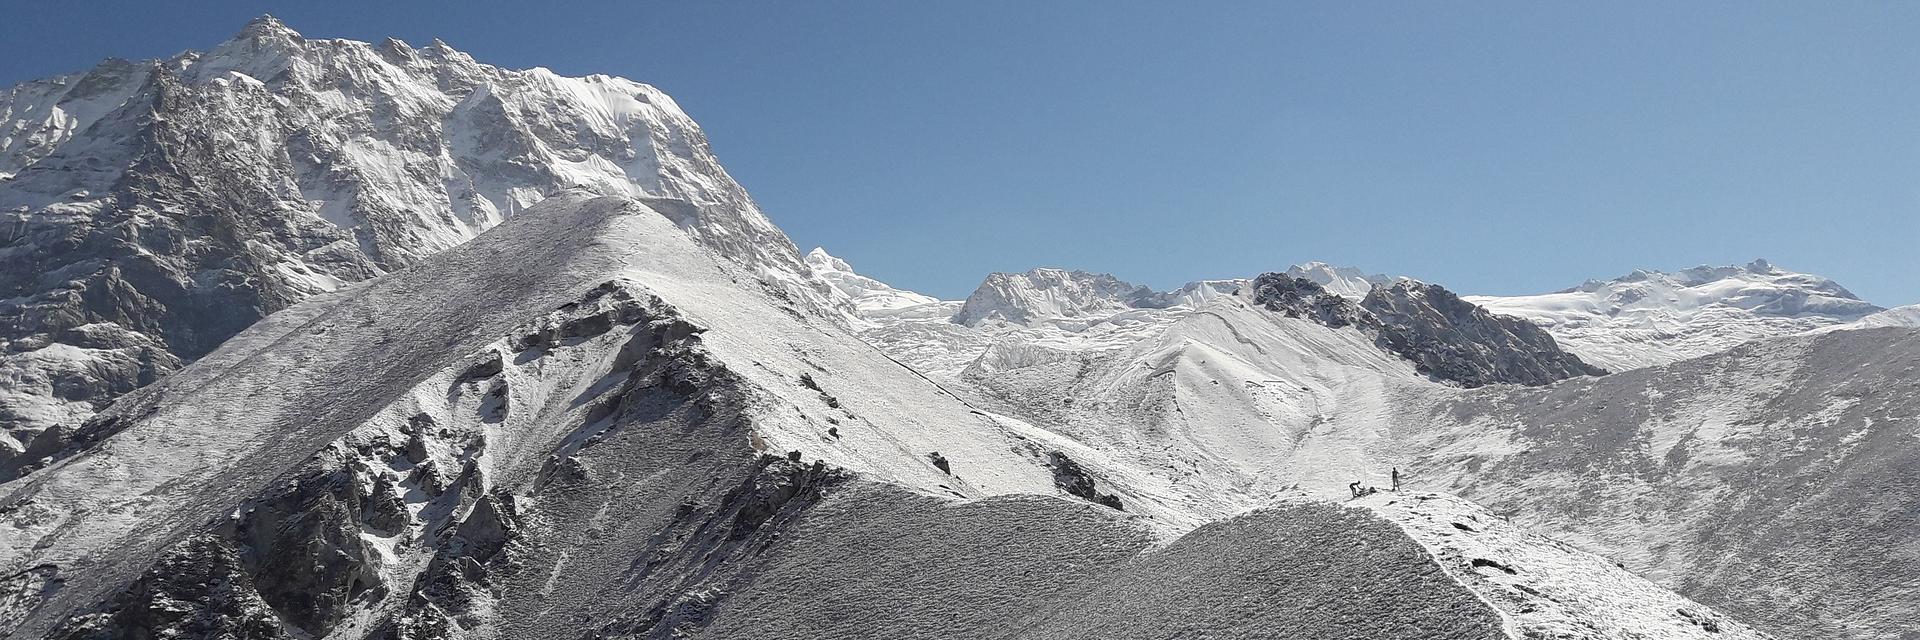 Climbing & Expeditions in Langtang Region